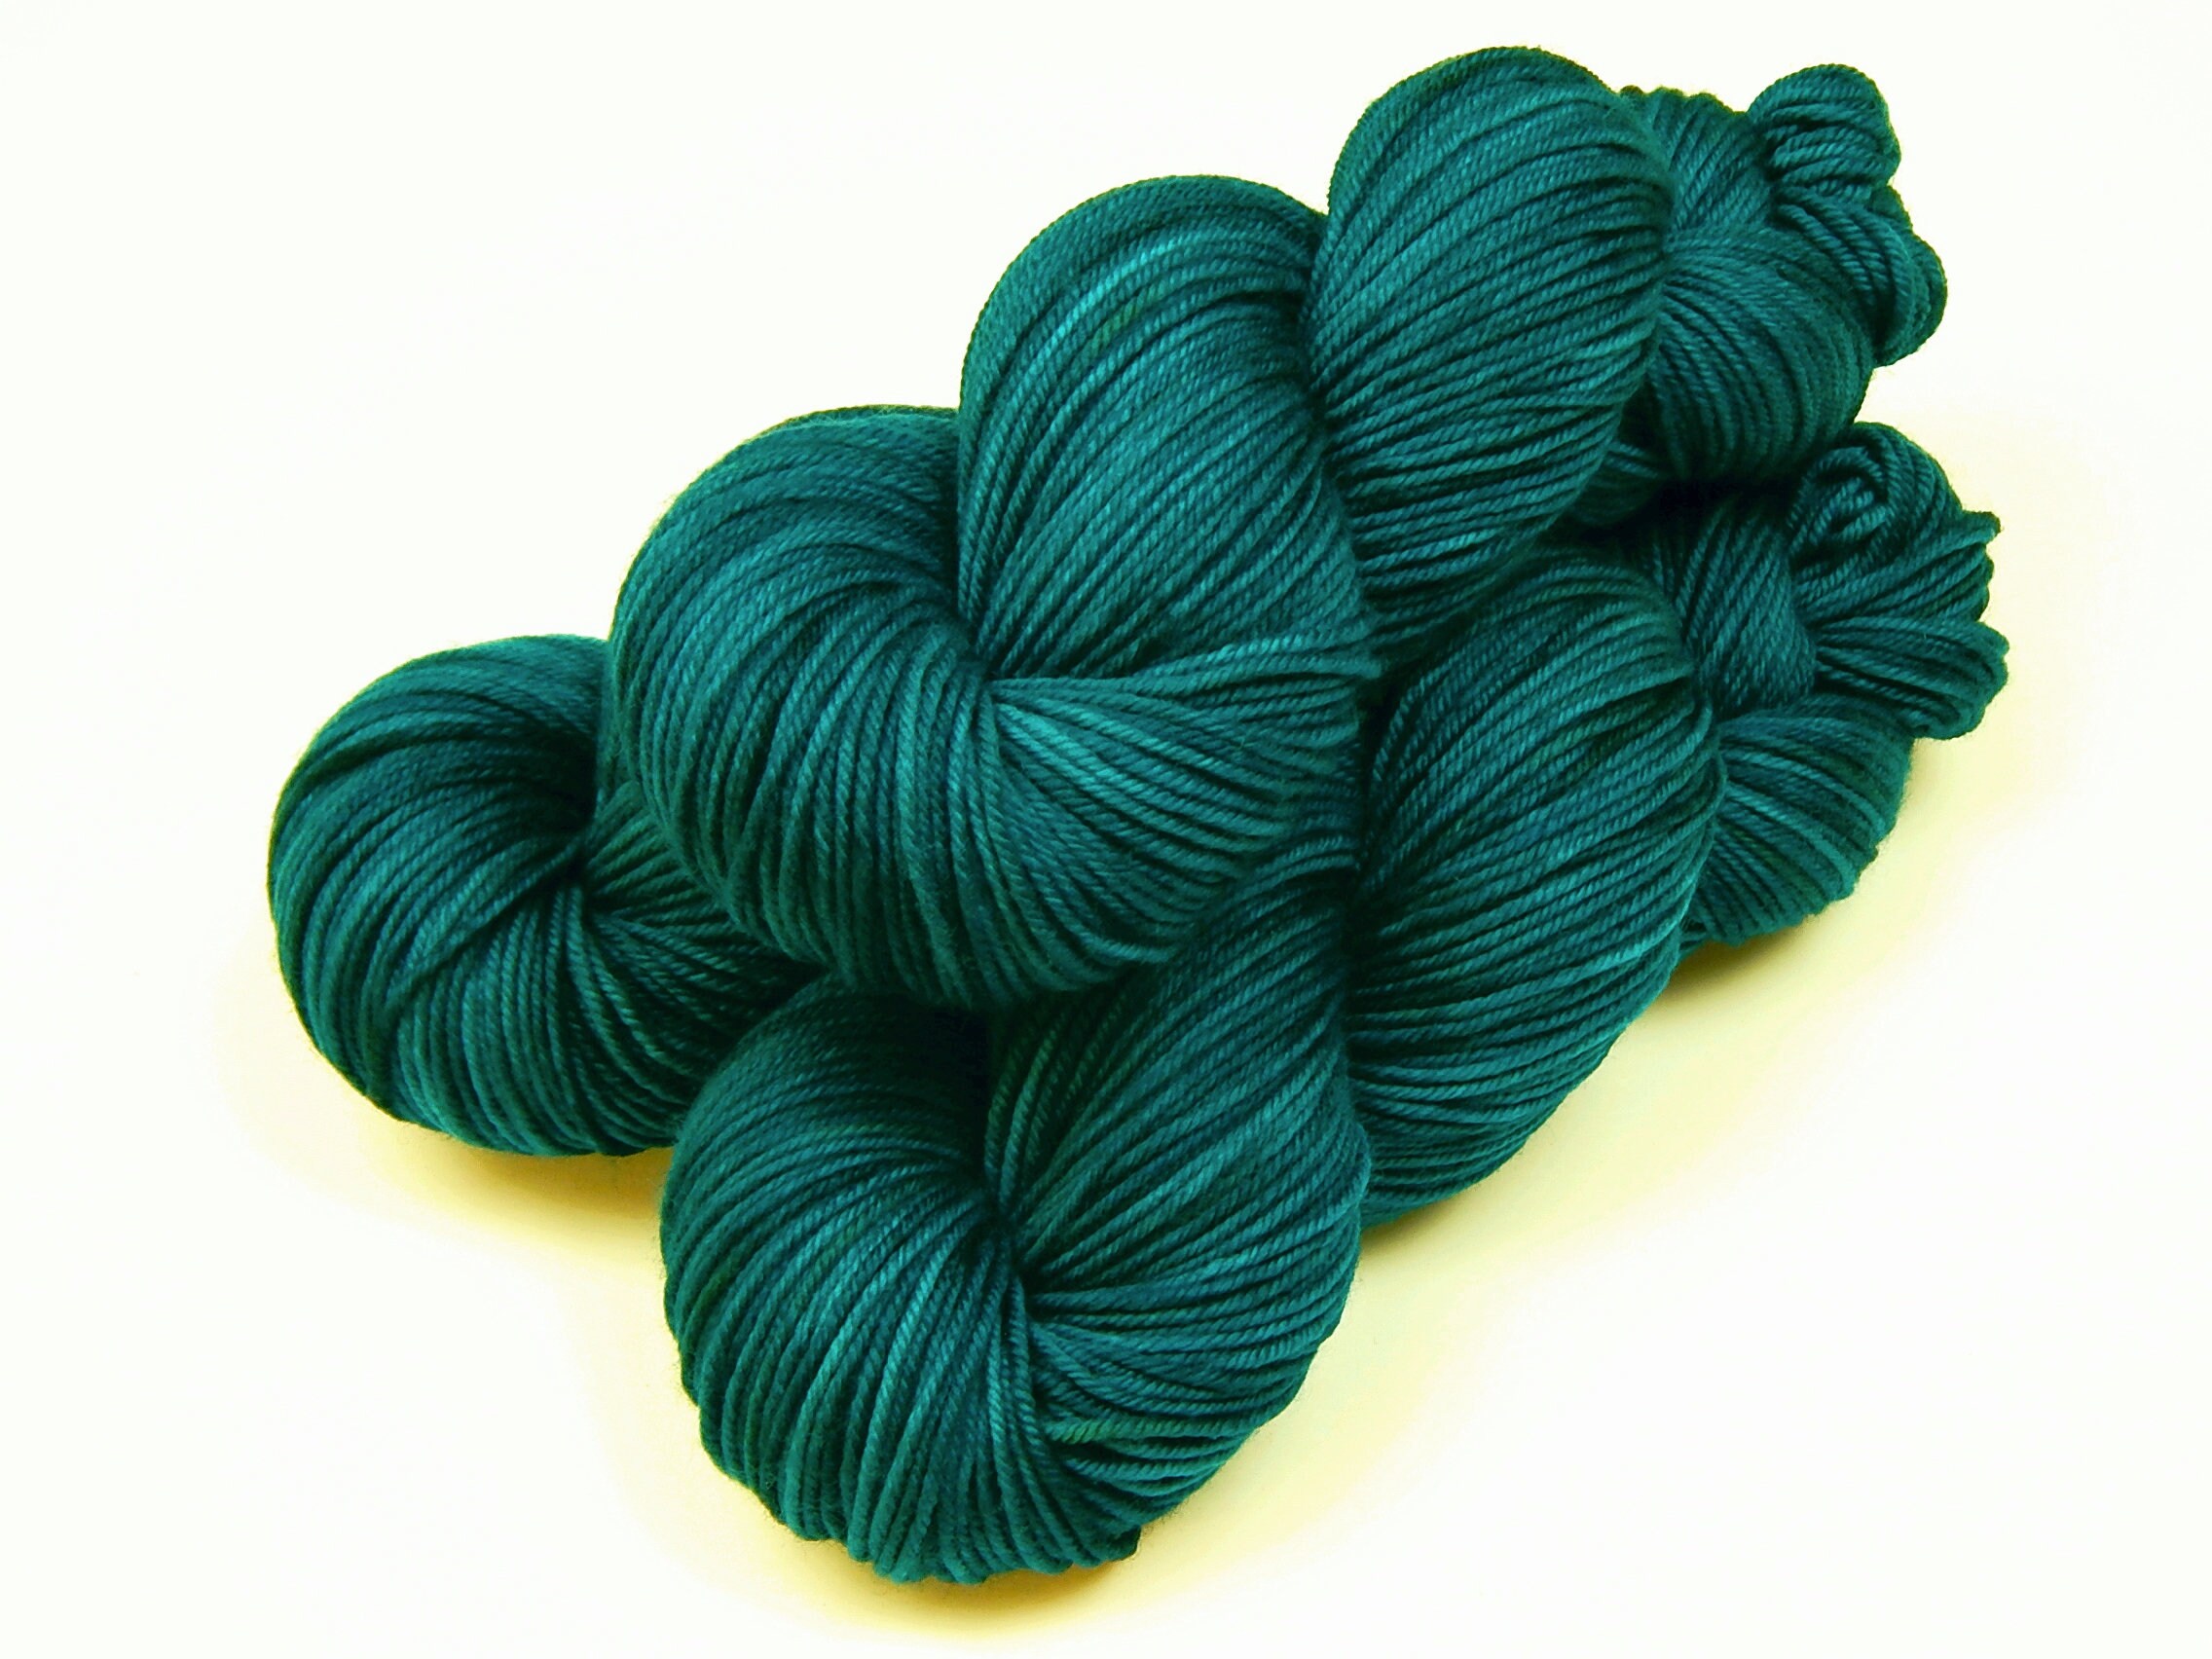 Hand-dyed 8/2 cotton and rayon yarn, 400 yard skein and 700 yard